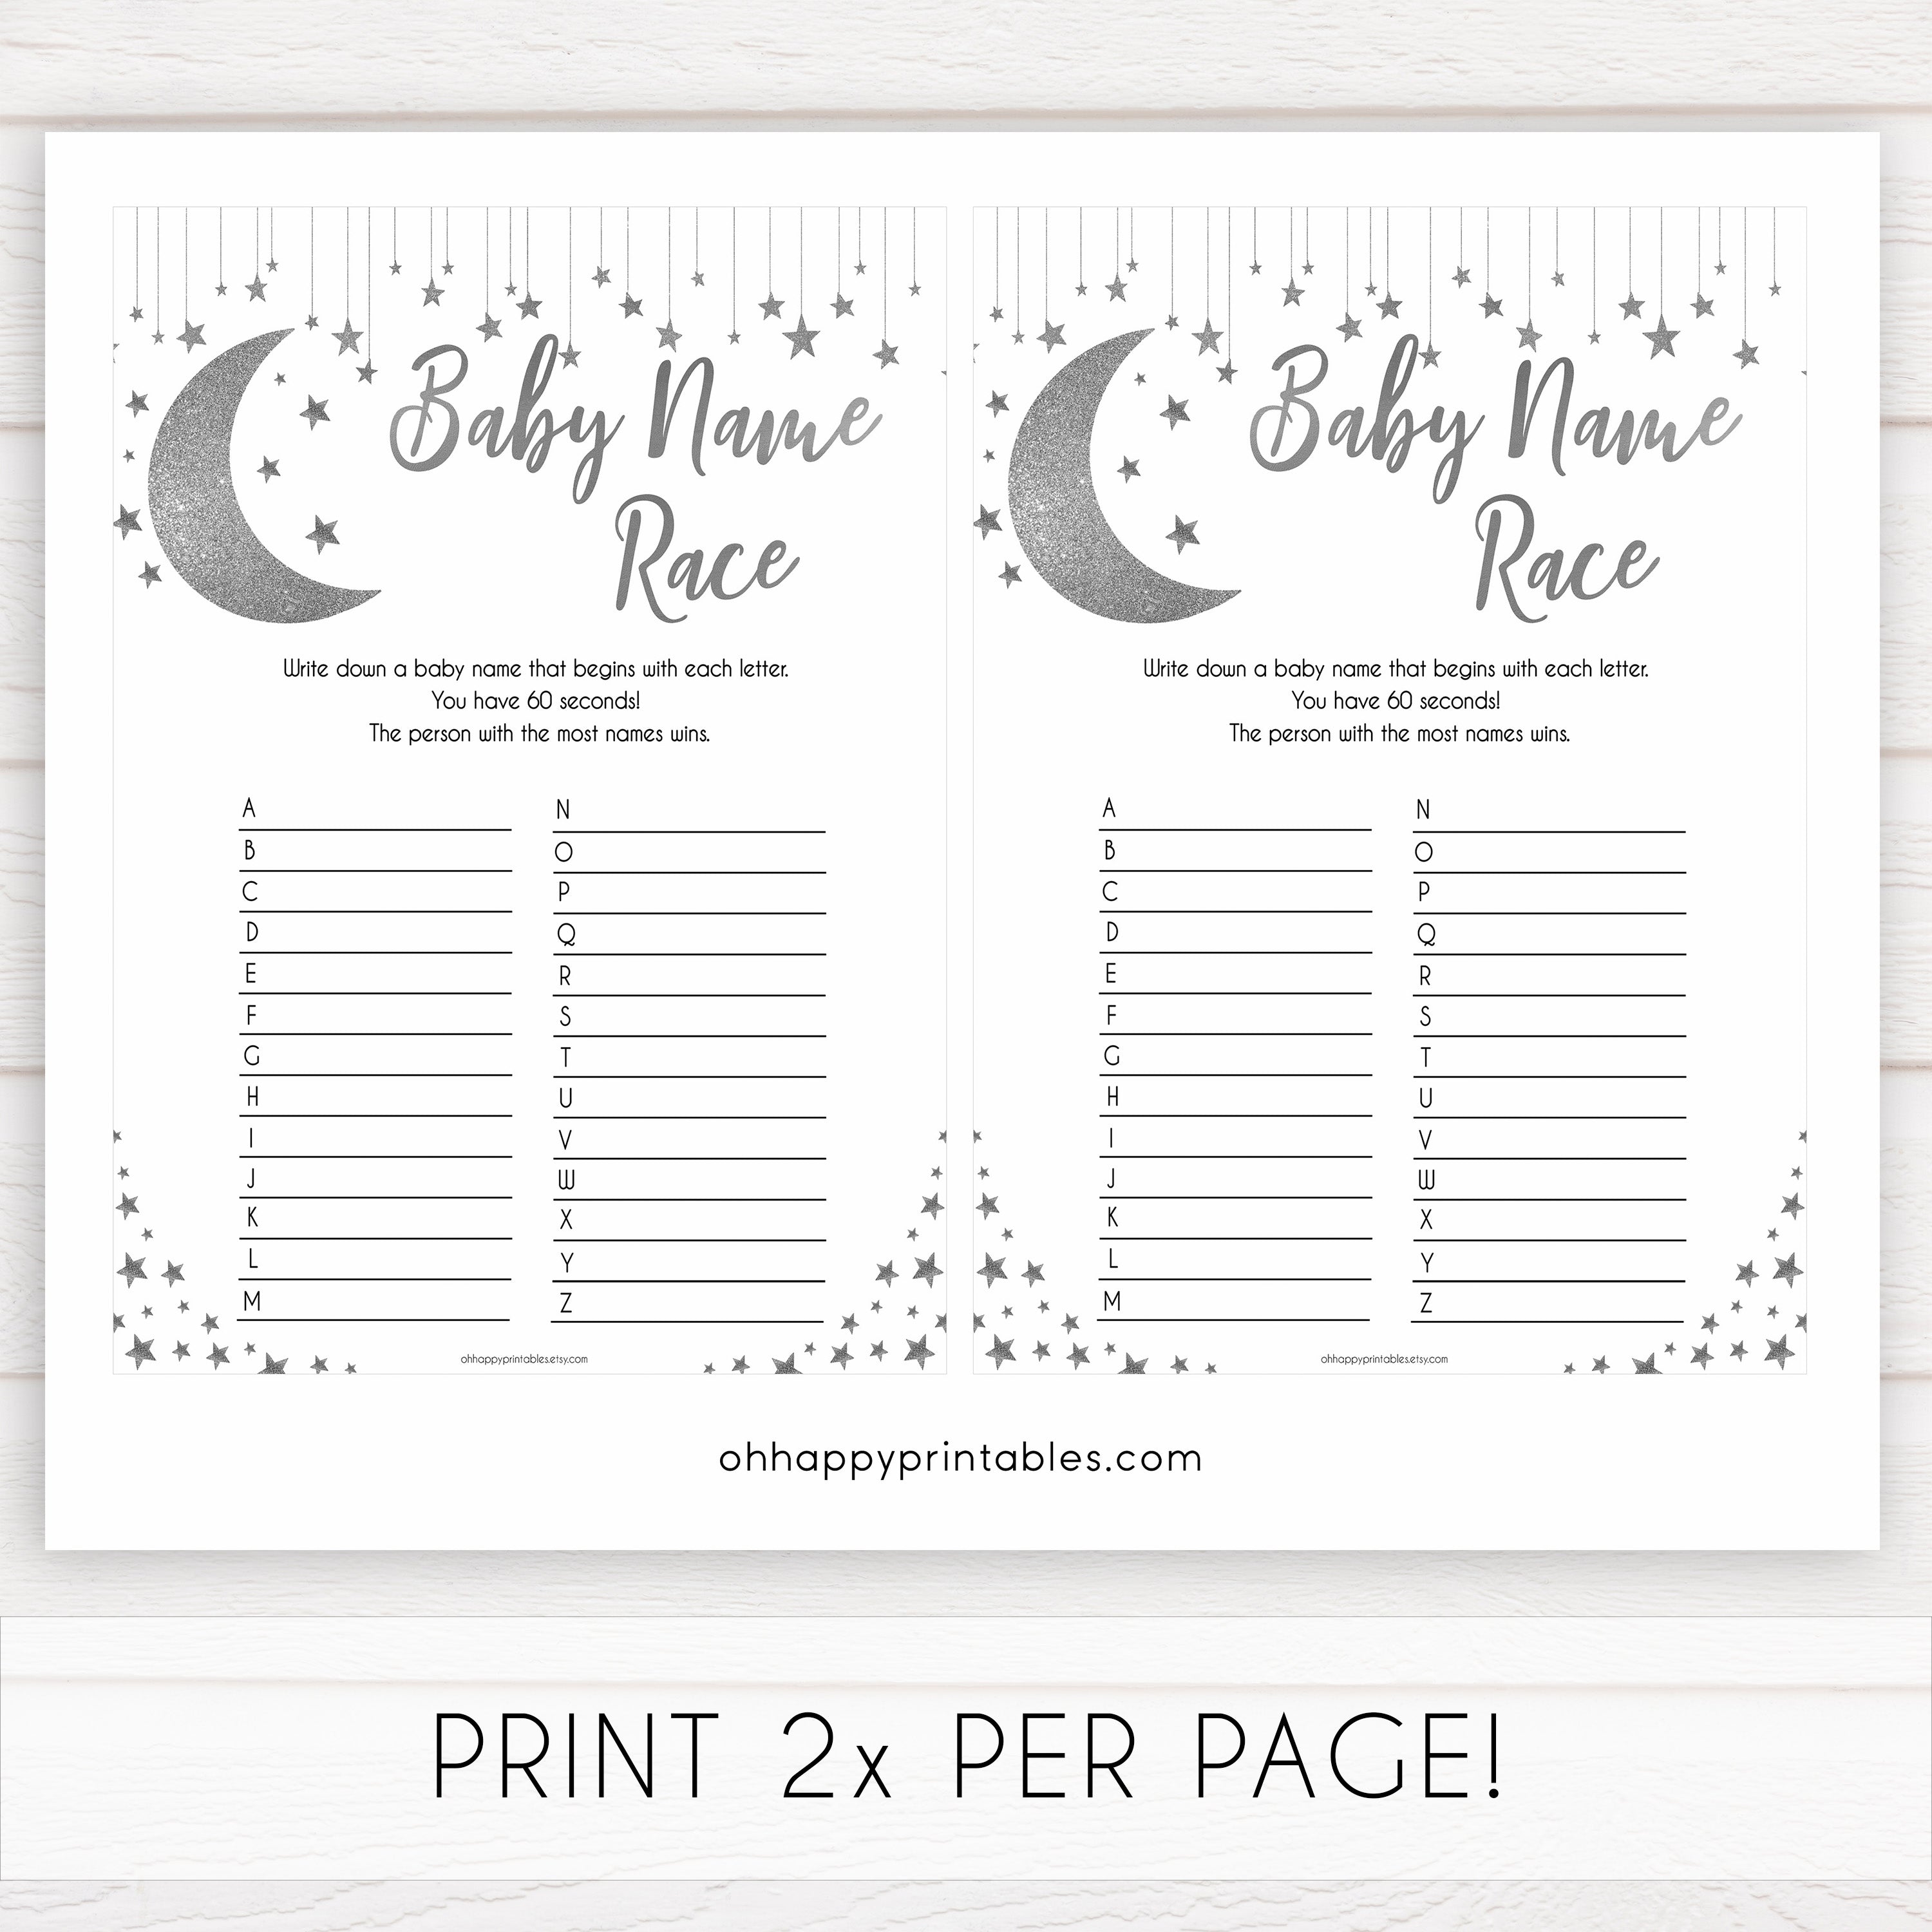 Silver little star, baby name race baby games, baby shower games, printable baby games, fun baby games, twinkle little star games, baby games, fun baby shower ideas, baby shower ideas